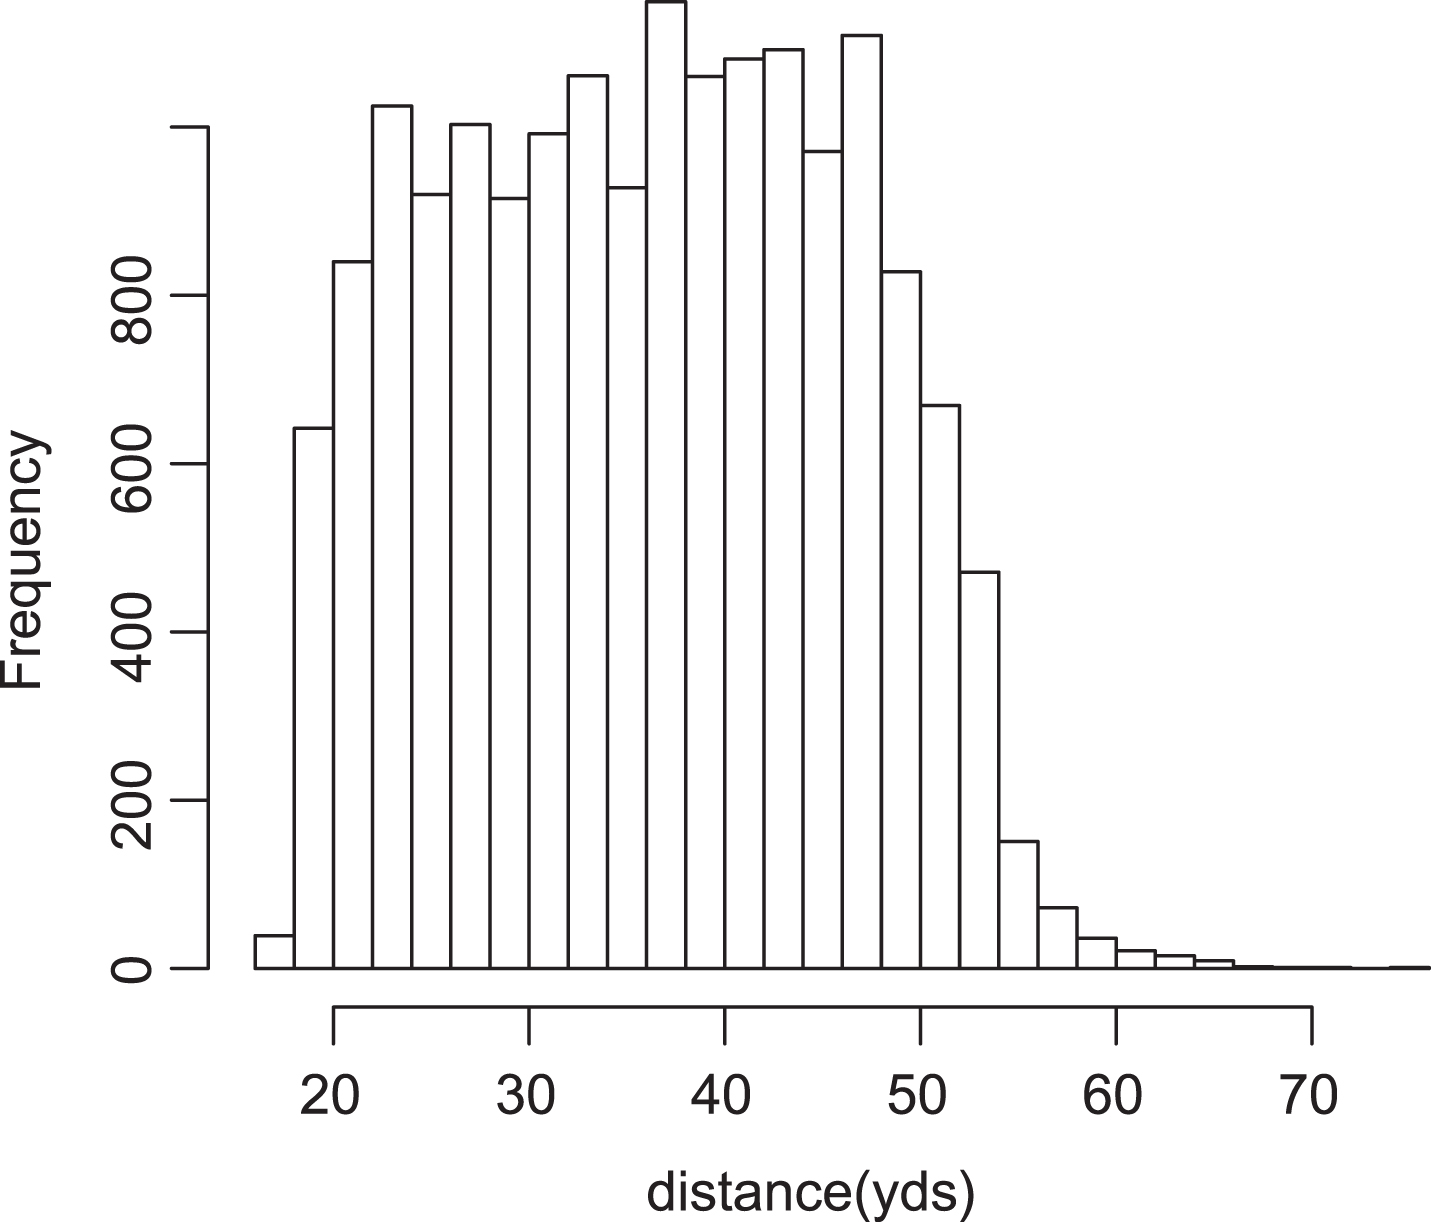 Frequency histogram of attempt distances.